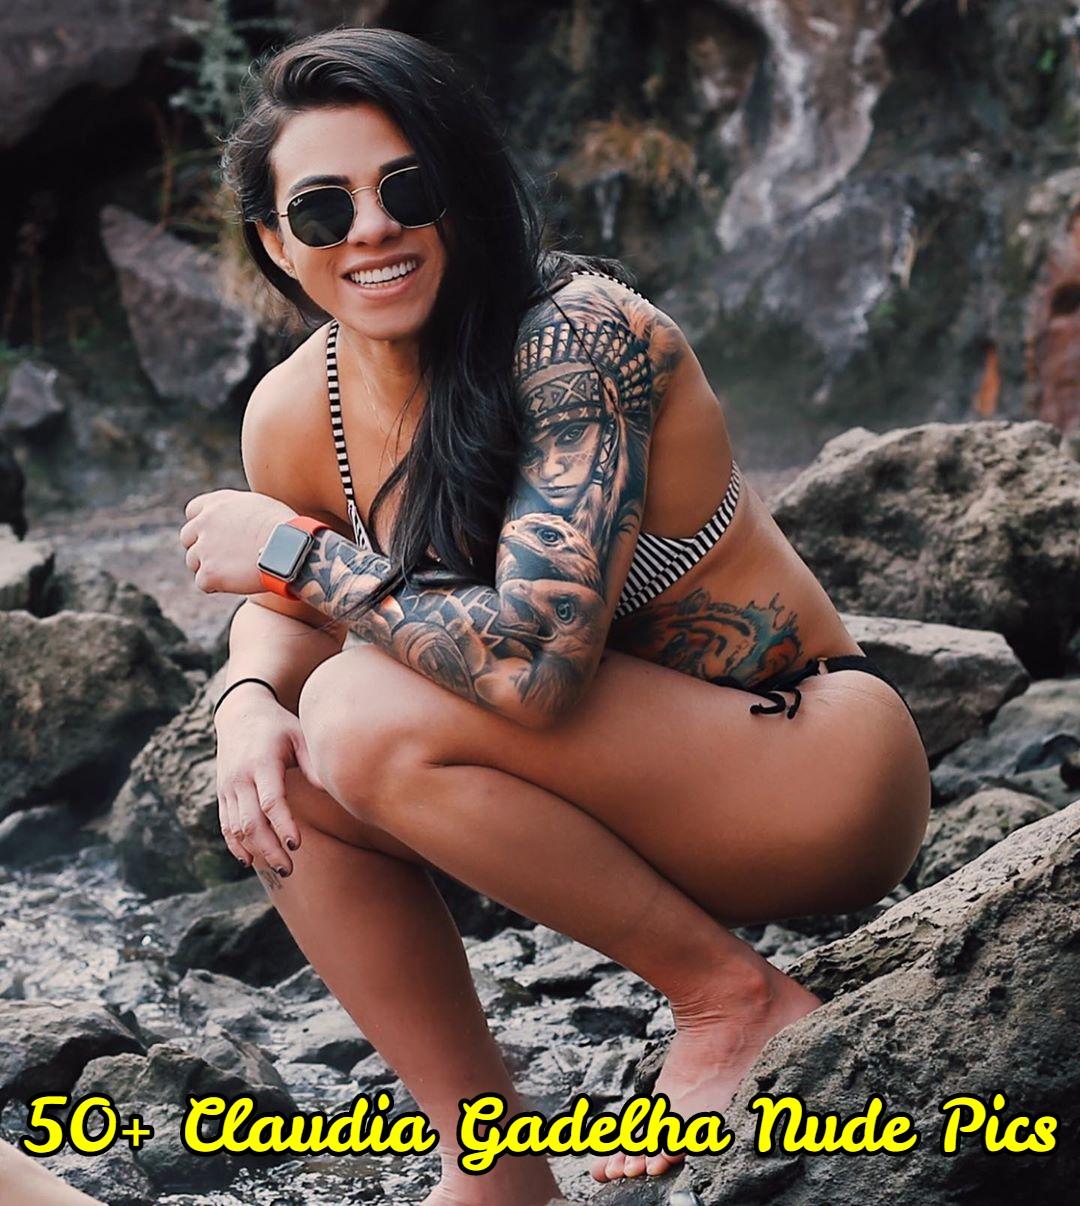 UFC star Claudia Gadelha strips naked to send fans inspirational message of  'freedom' - Daily Star